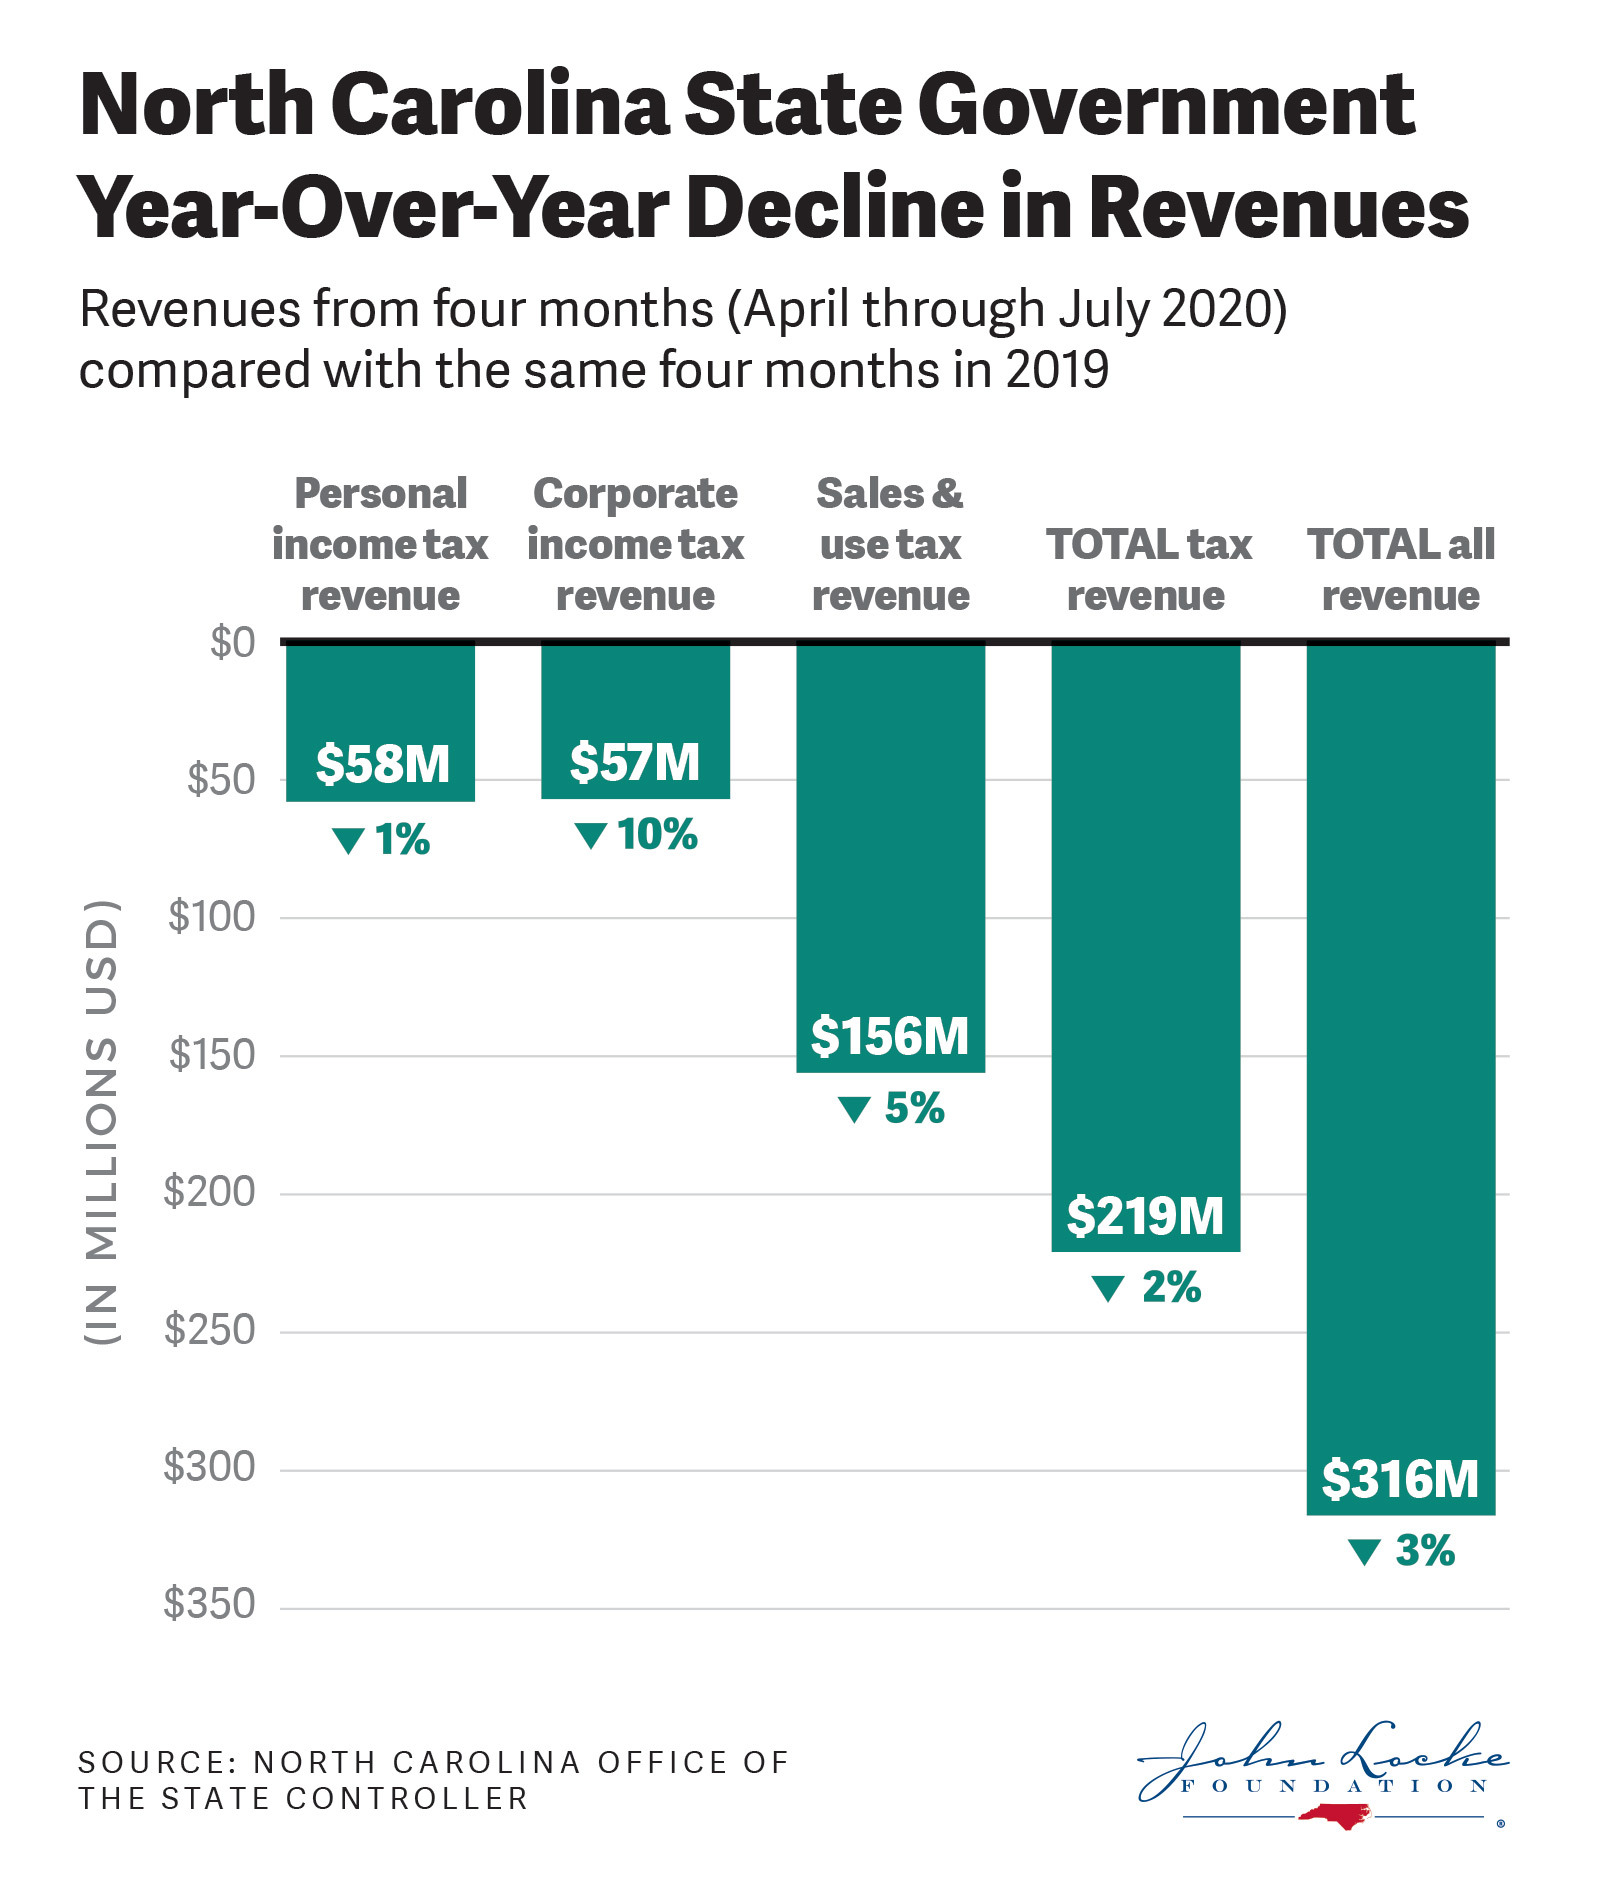 North Carolina State Government Year-Over-Year Decline in Revenues